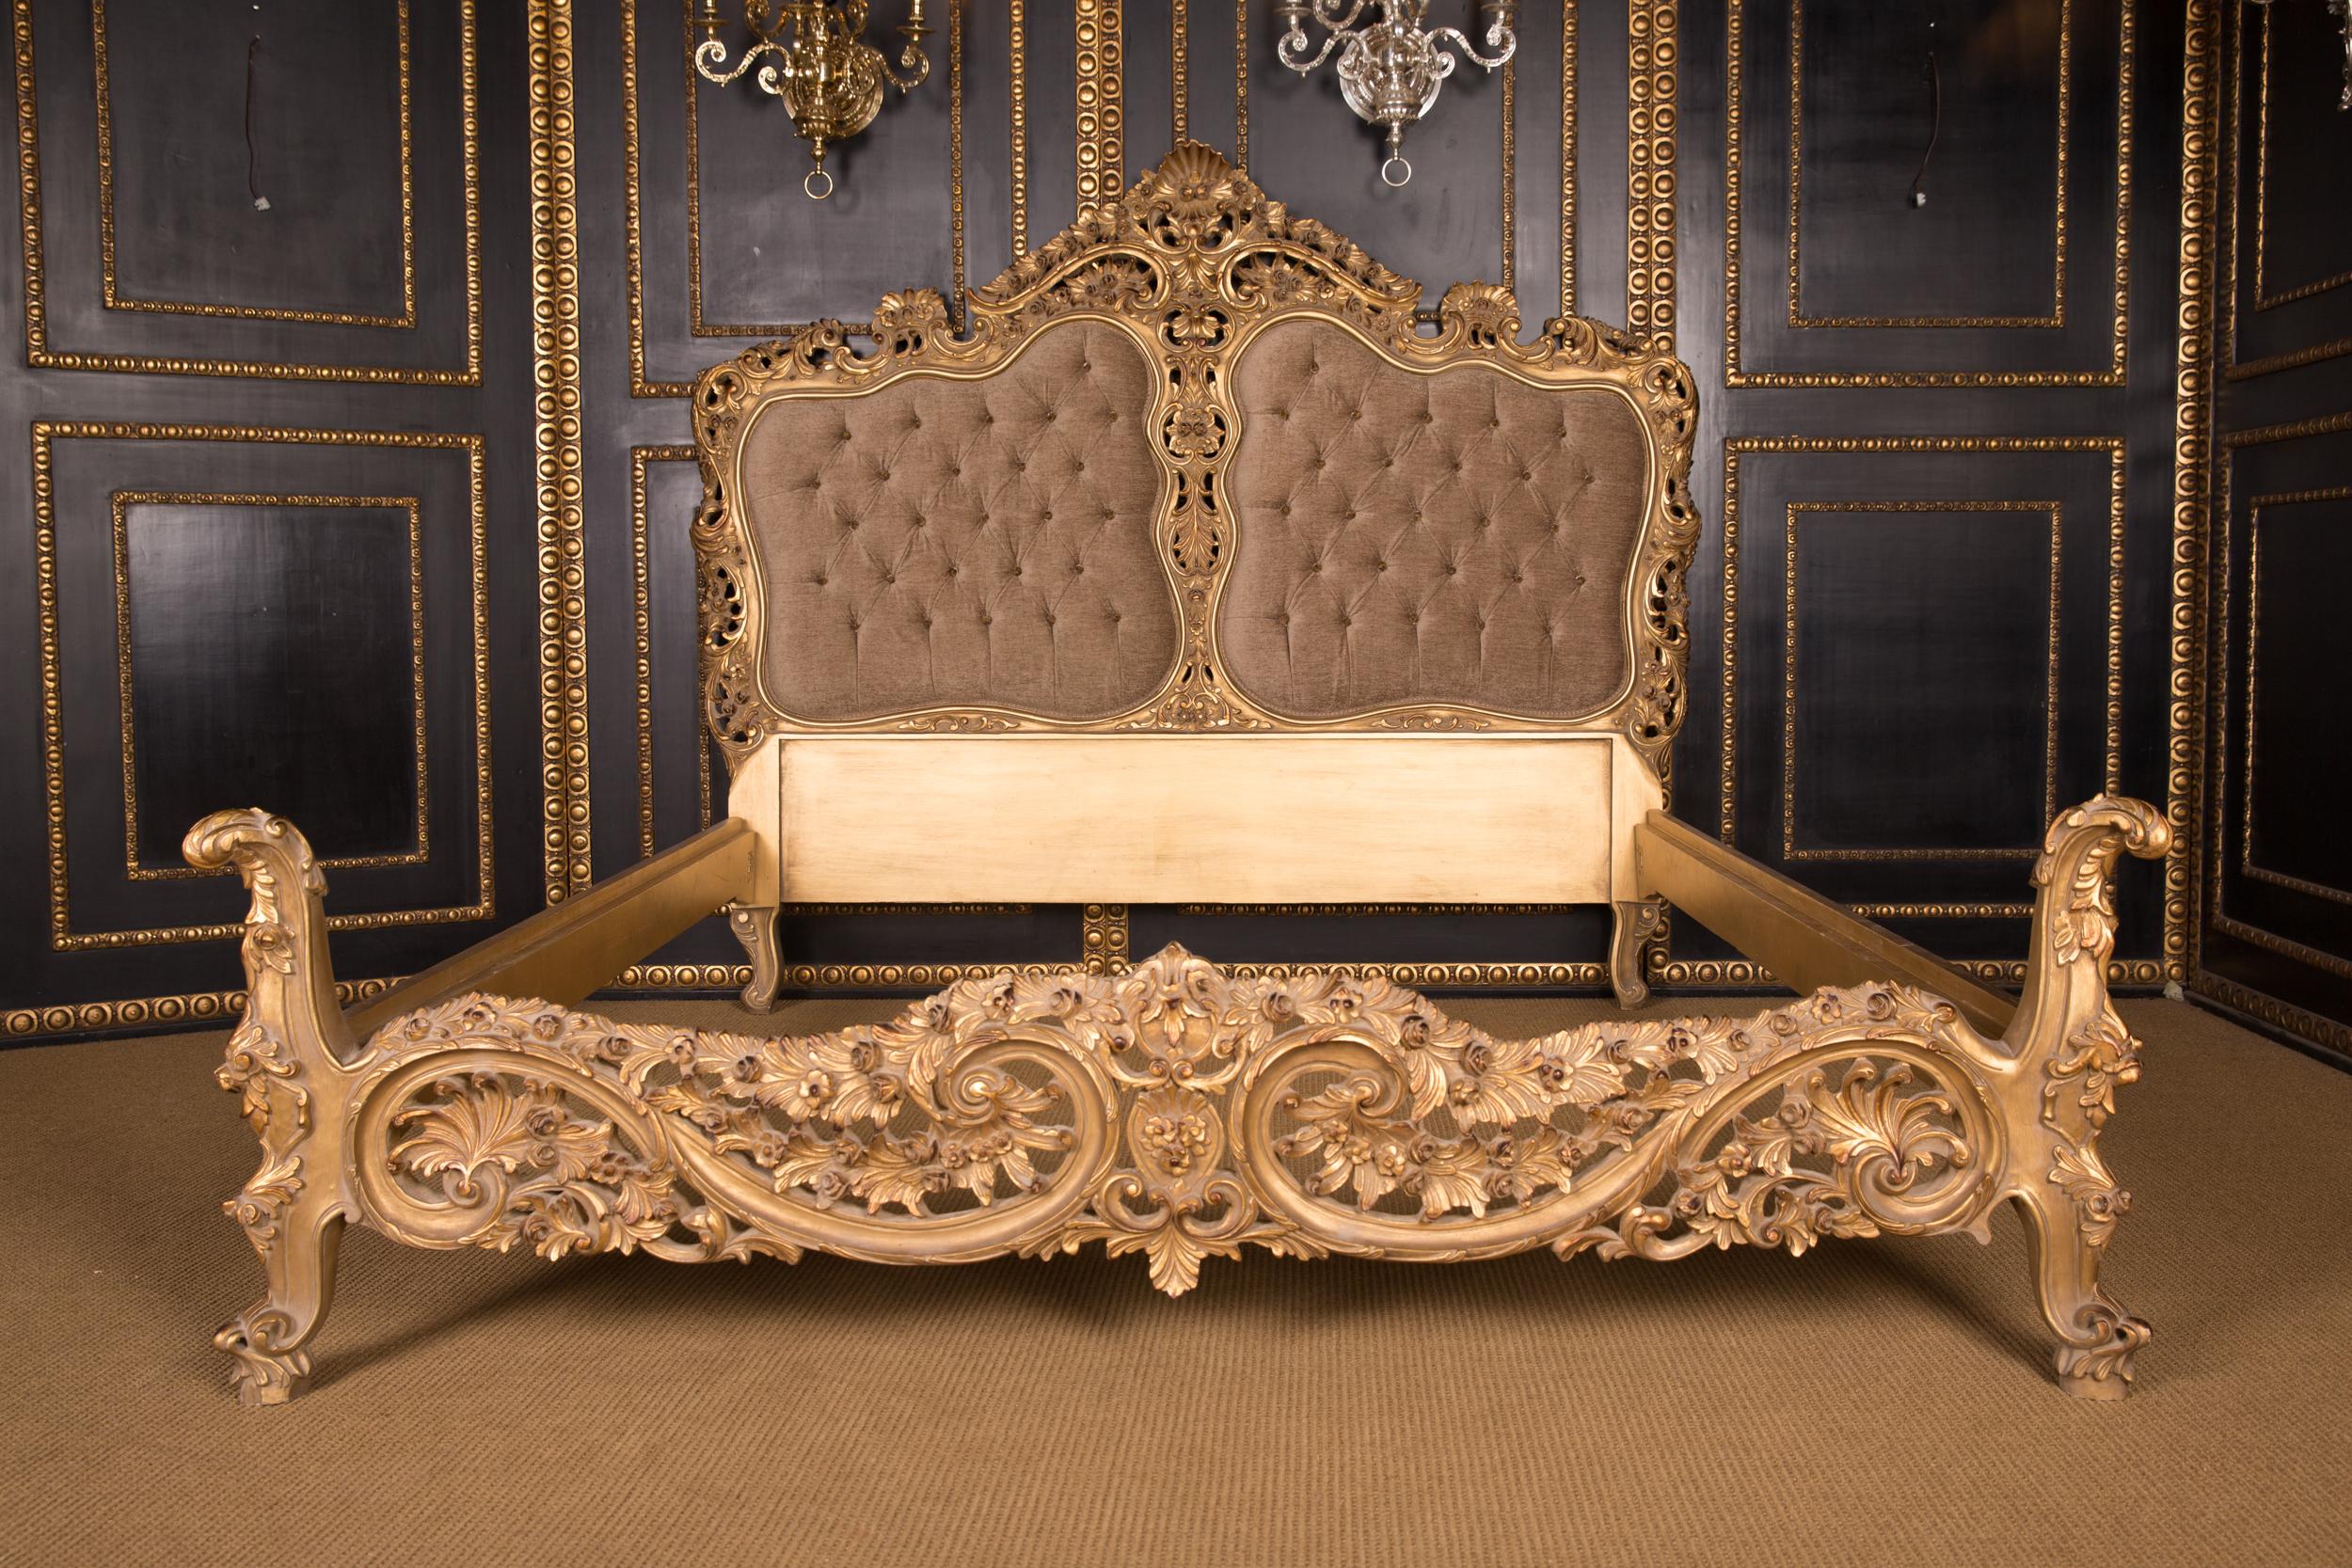 Solid beech wood, finely carved, colored and gilt gilded. Low foot and high headboard Quilted, curved backrest frame and open rocaille crowning. Everything is done by hand.